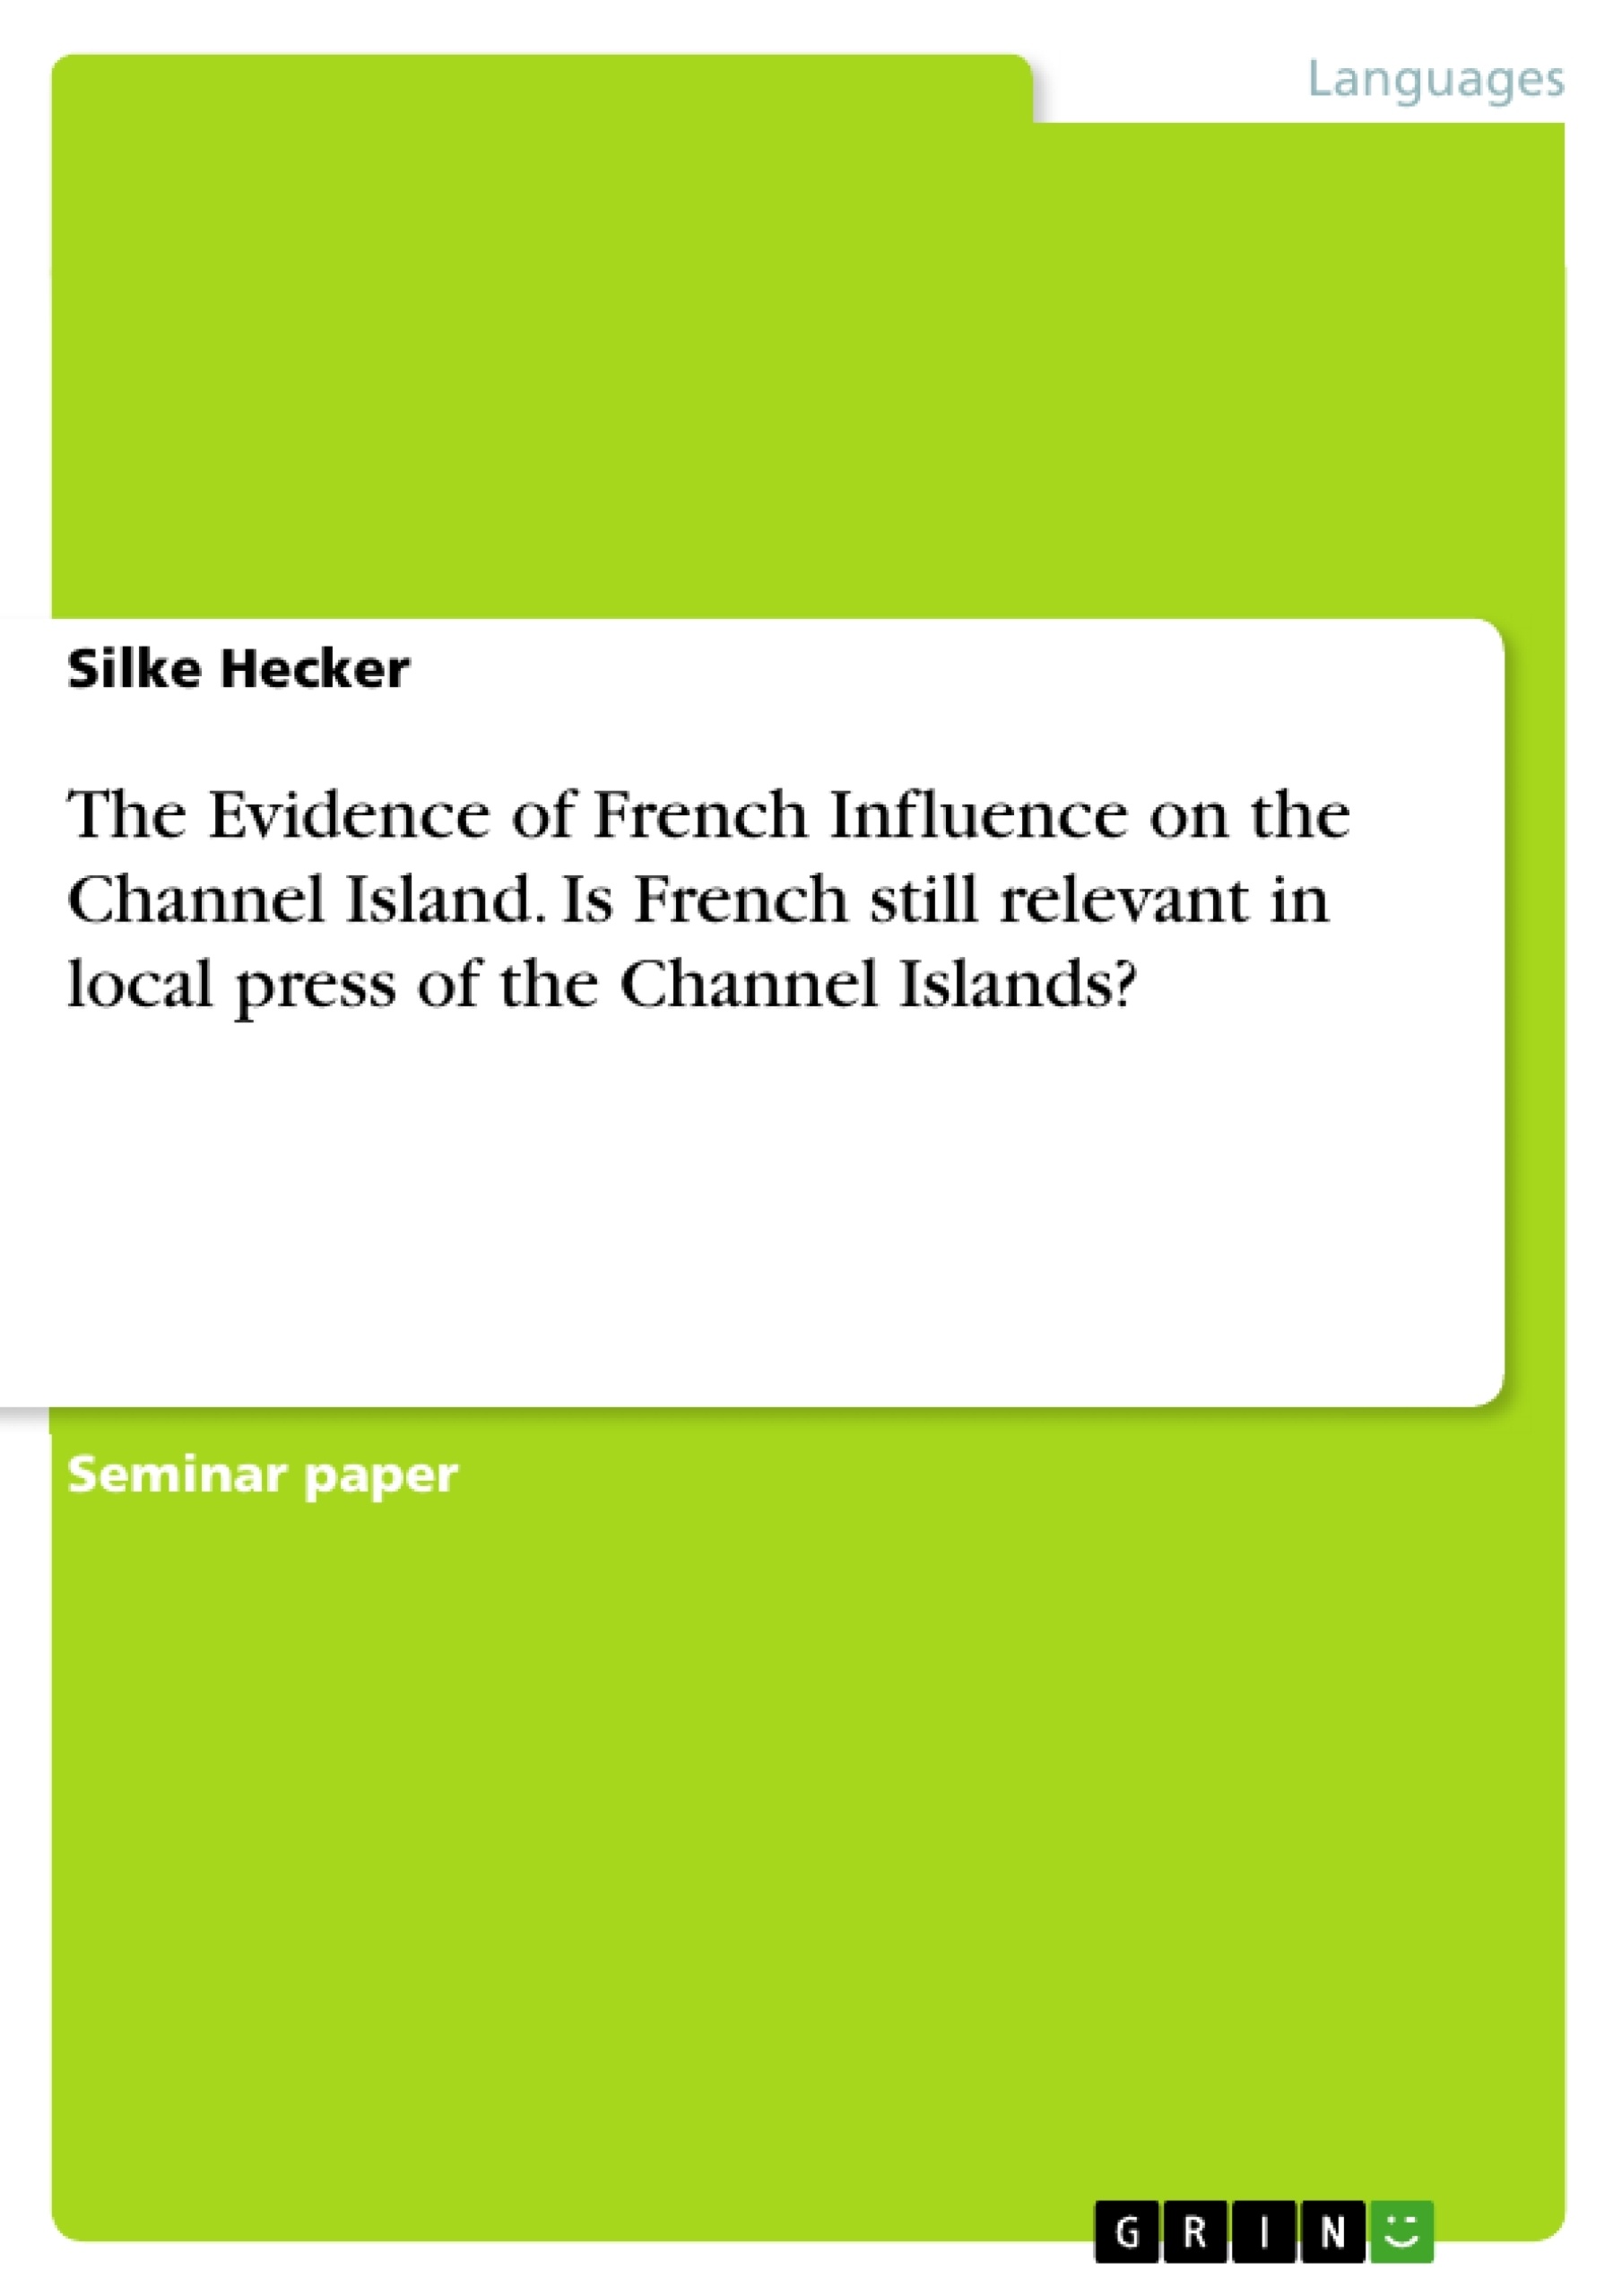 Titre: The Evidence of French Influence on the Channel Island. Is French still relevant in local press of the Channel Islands?